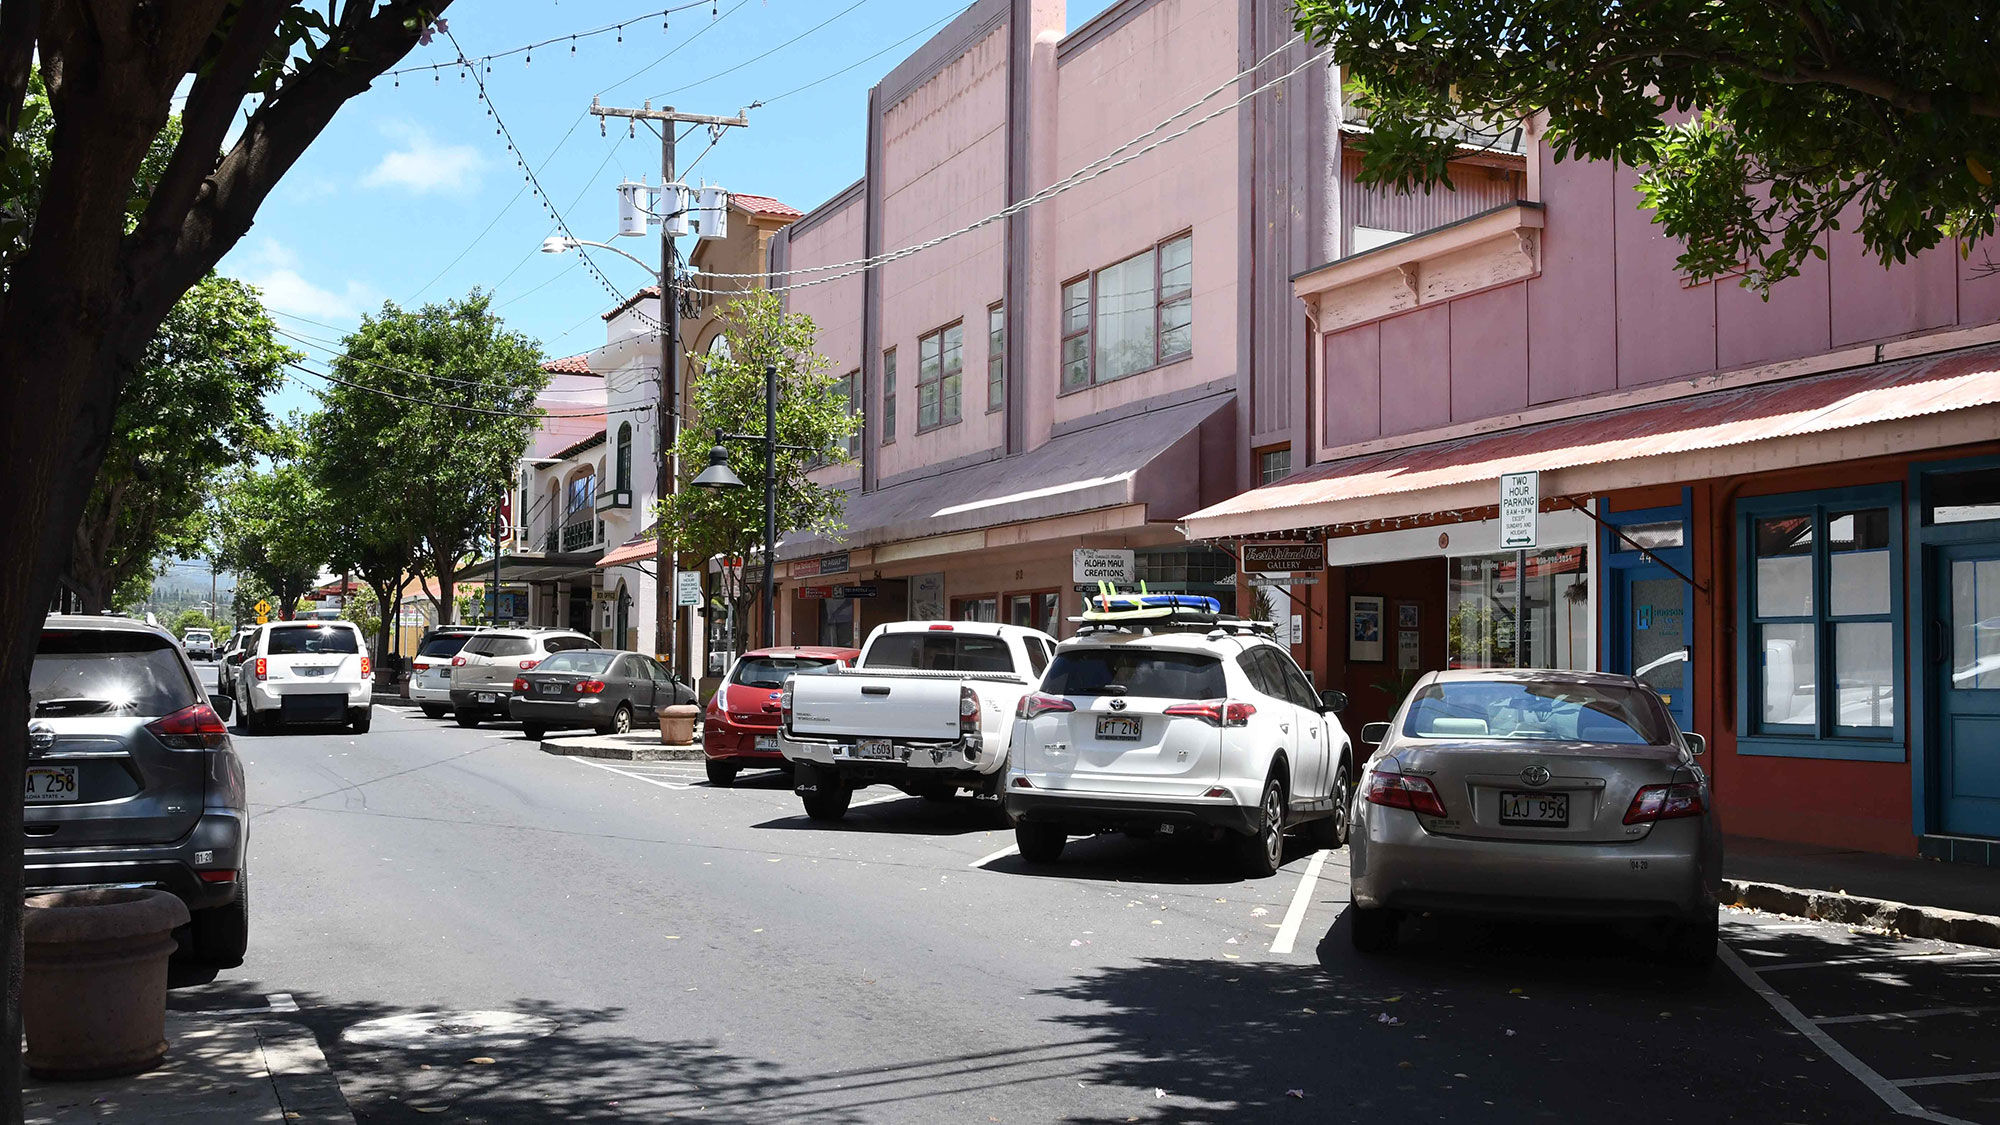 One of Maui’s cherished towns, Wailuku is well known for its historic landmarks, shops and boutiques.